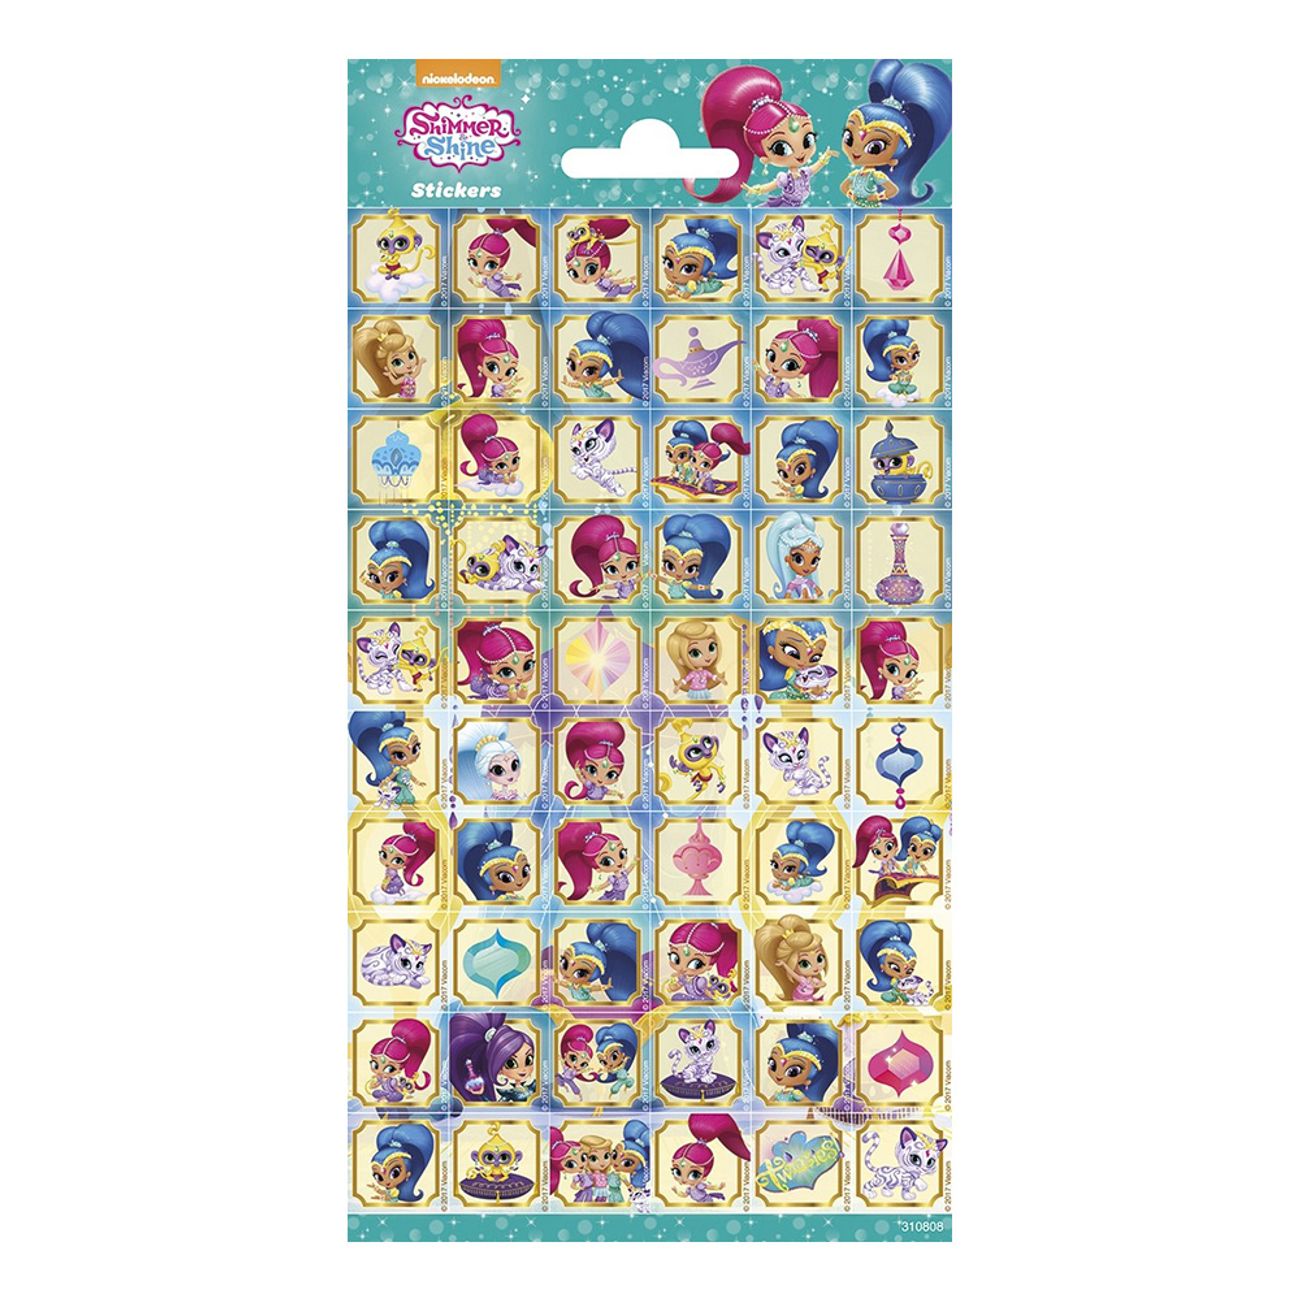 stickers-shimmer-shine-1